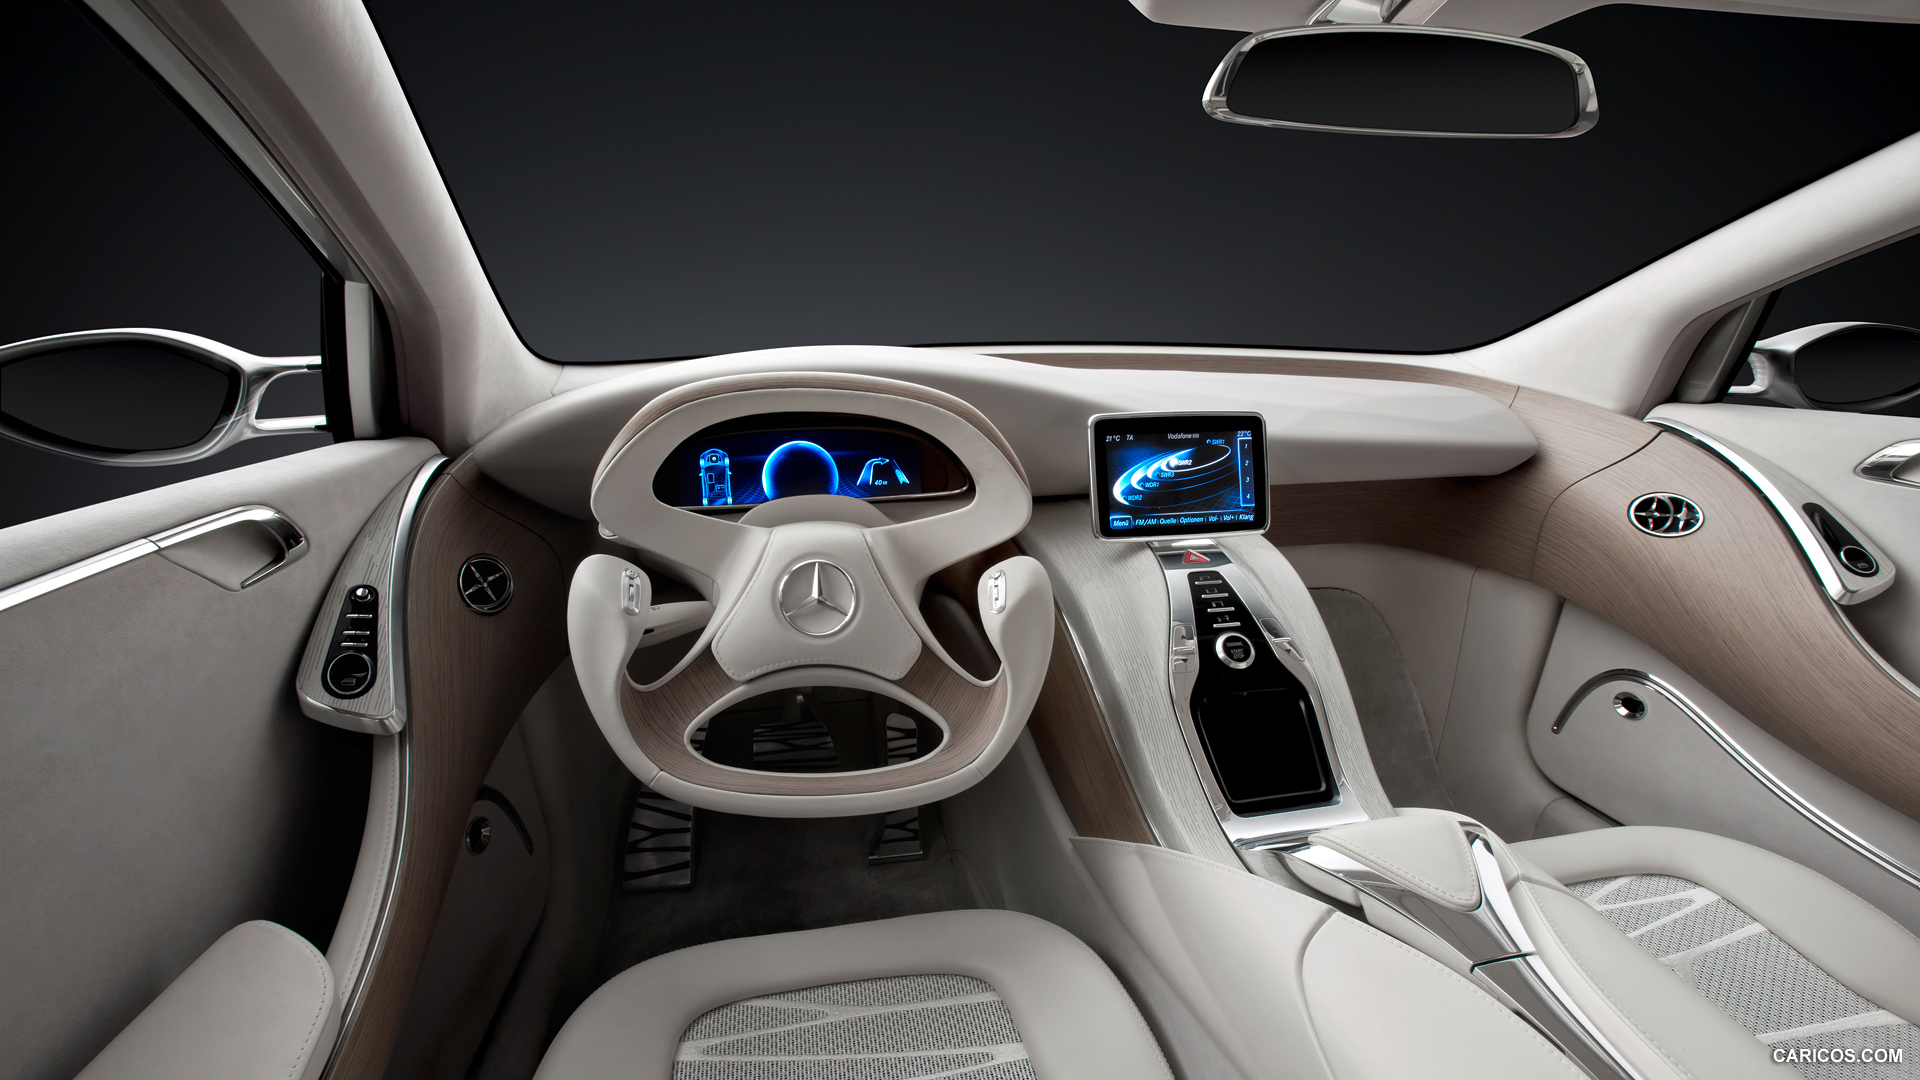 Mercedes-Benz F800 Style Concept (2010)  - Interior, #61 of 120